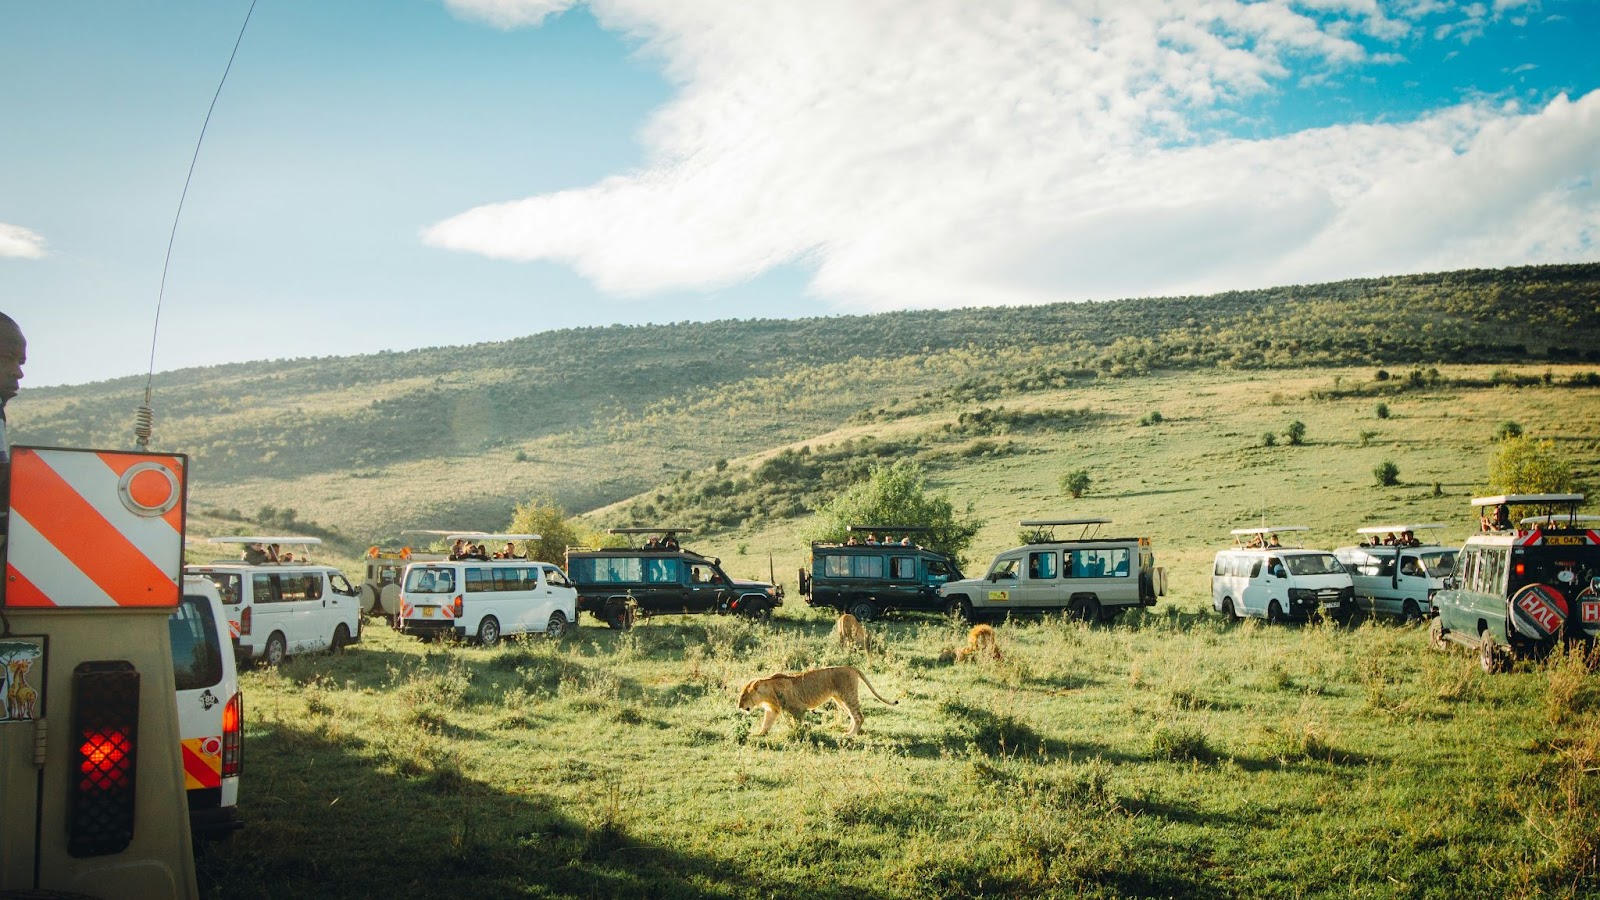 Safaris are a cool experience for travelers particularly in July.
pictured: a group safari in Kenya